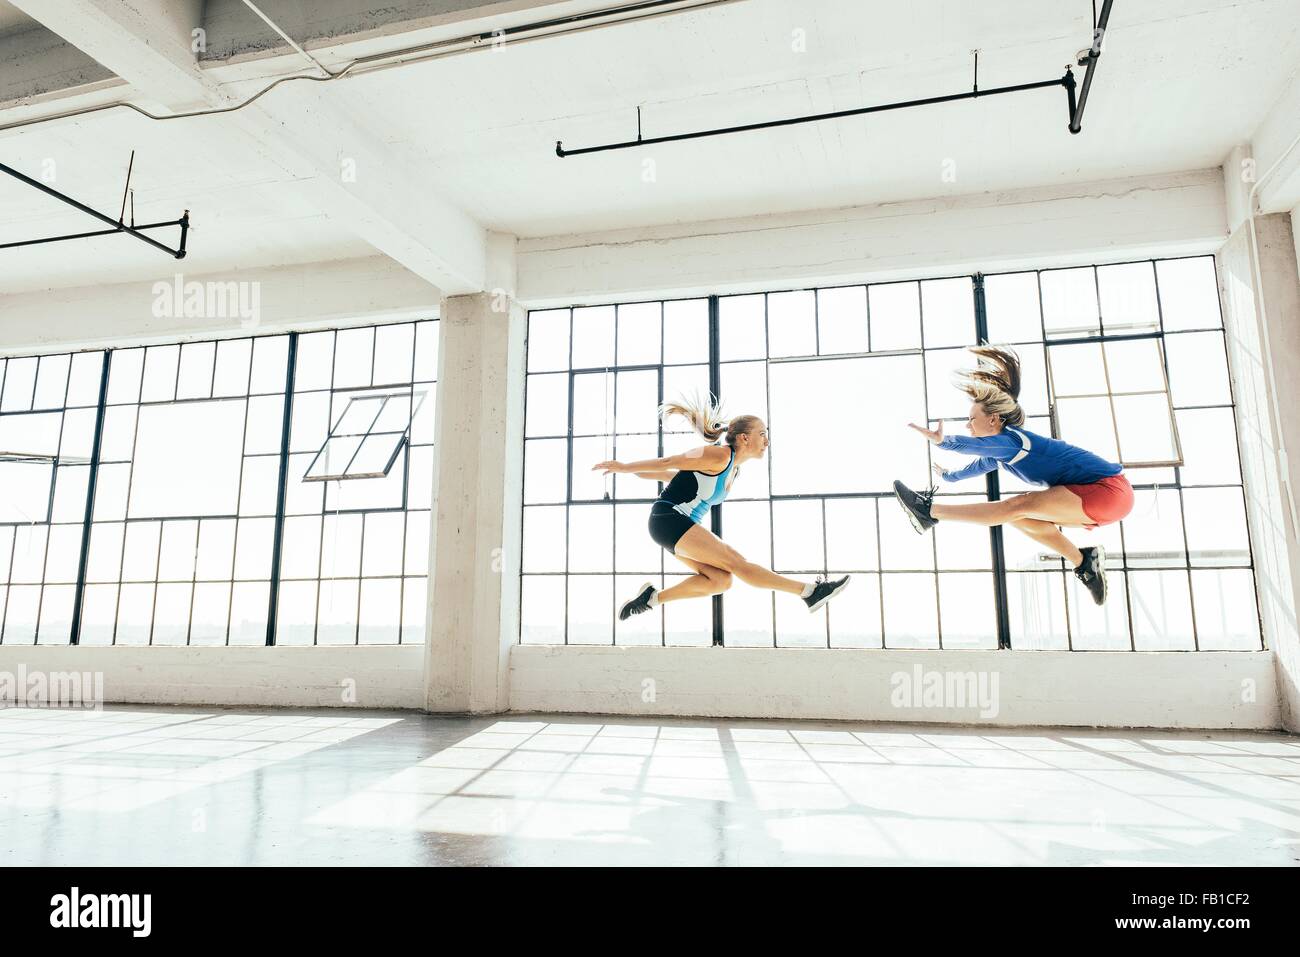 Low angle side view of young women in gym doing mid air lunge Stock Photo